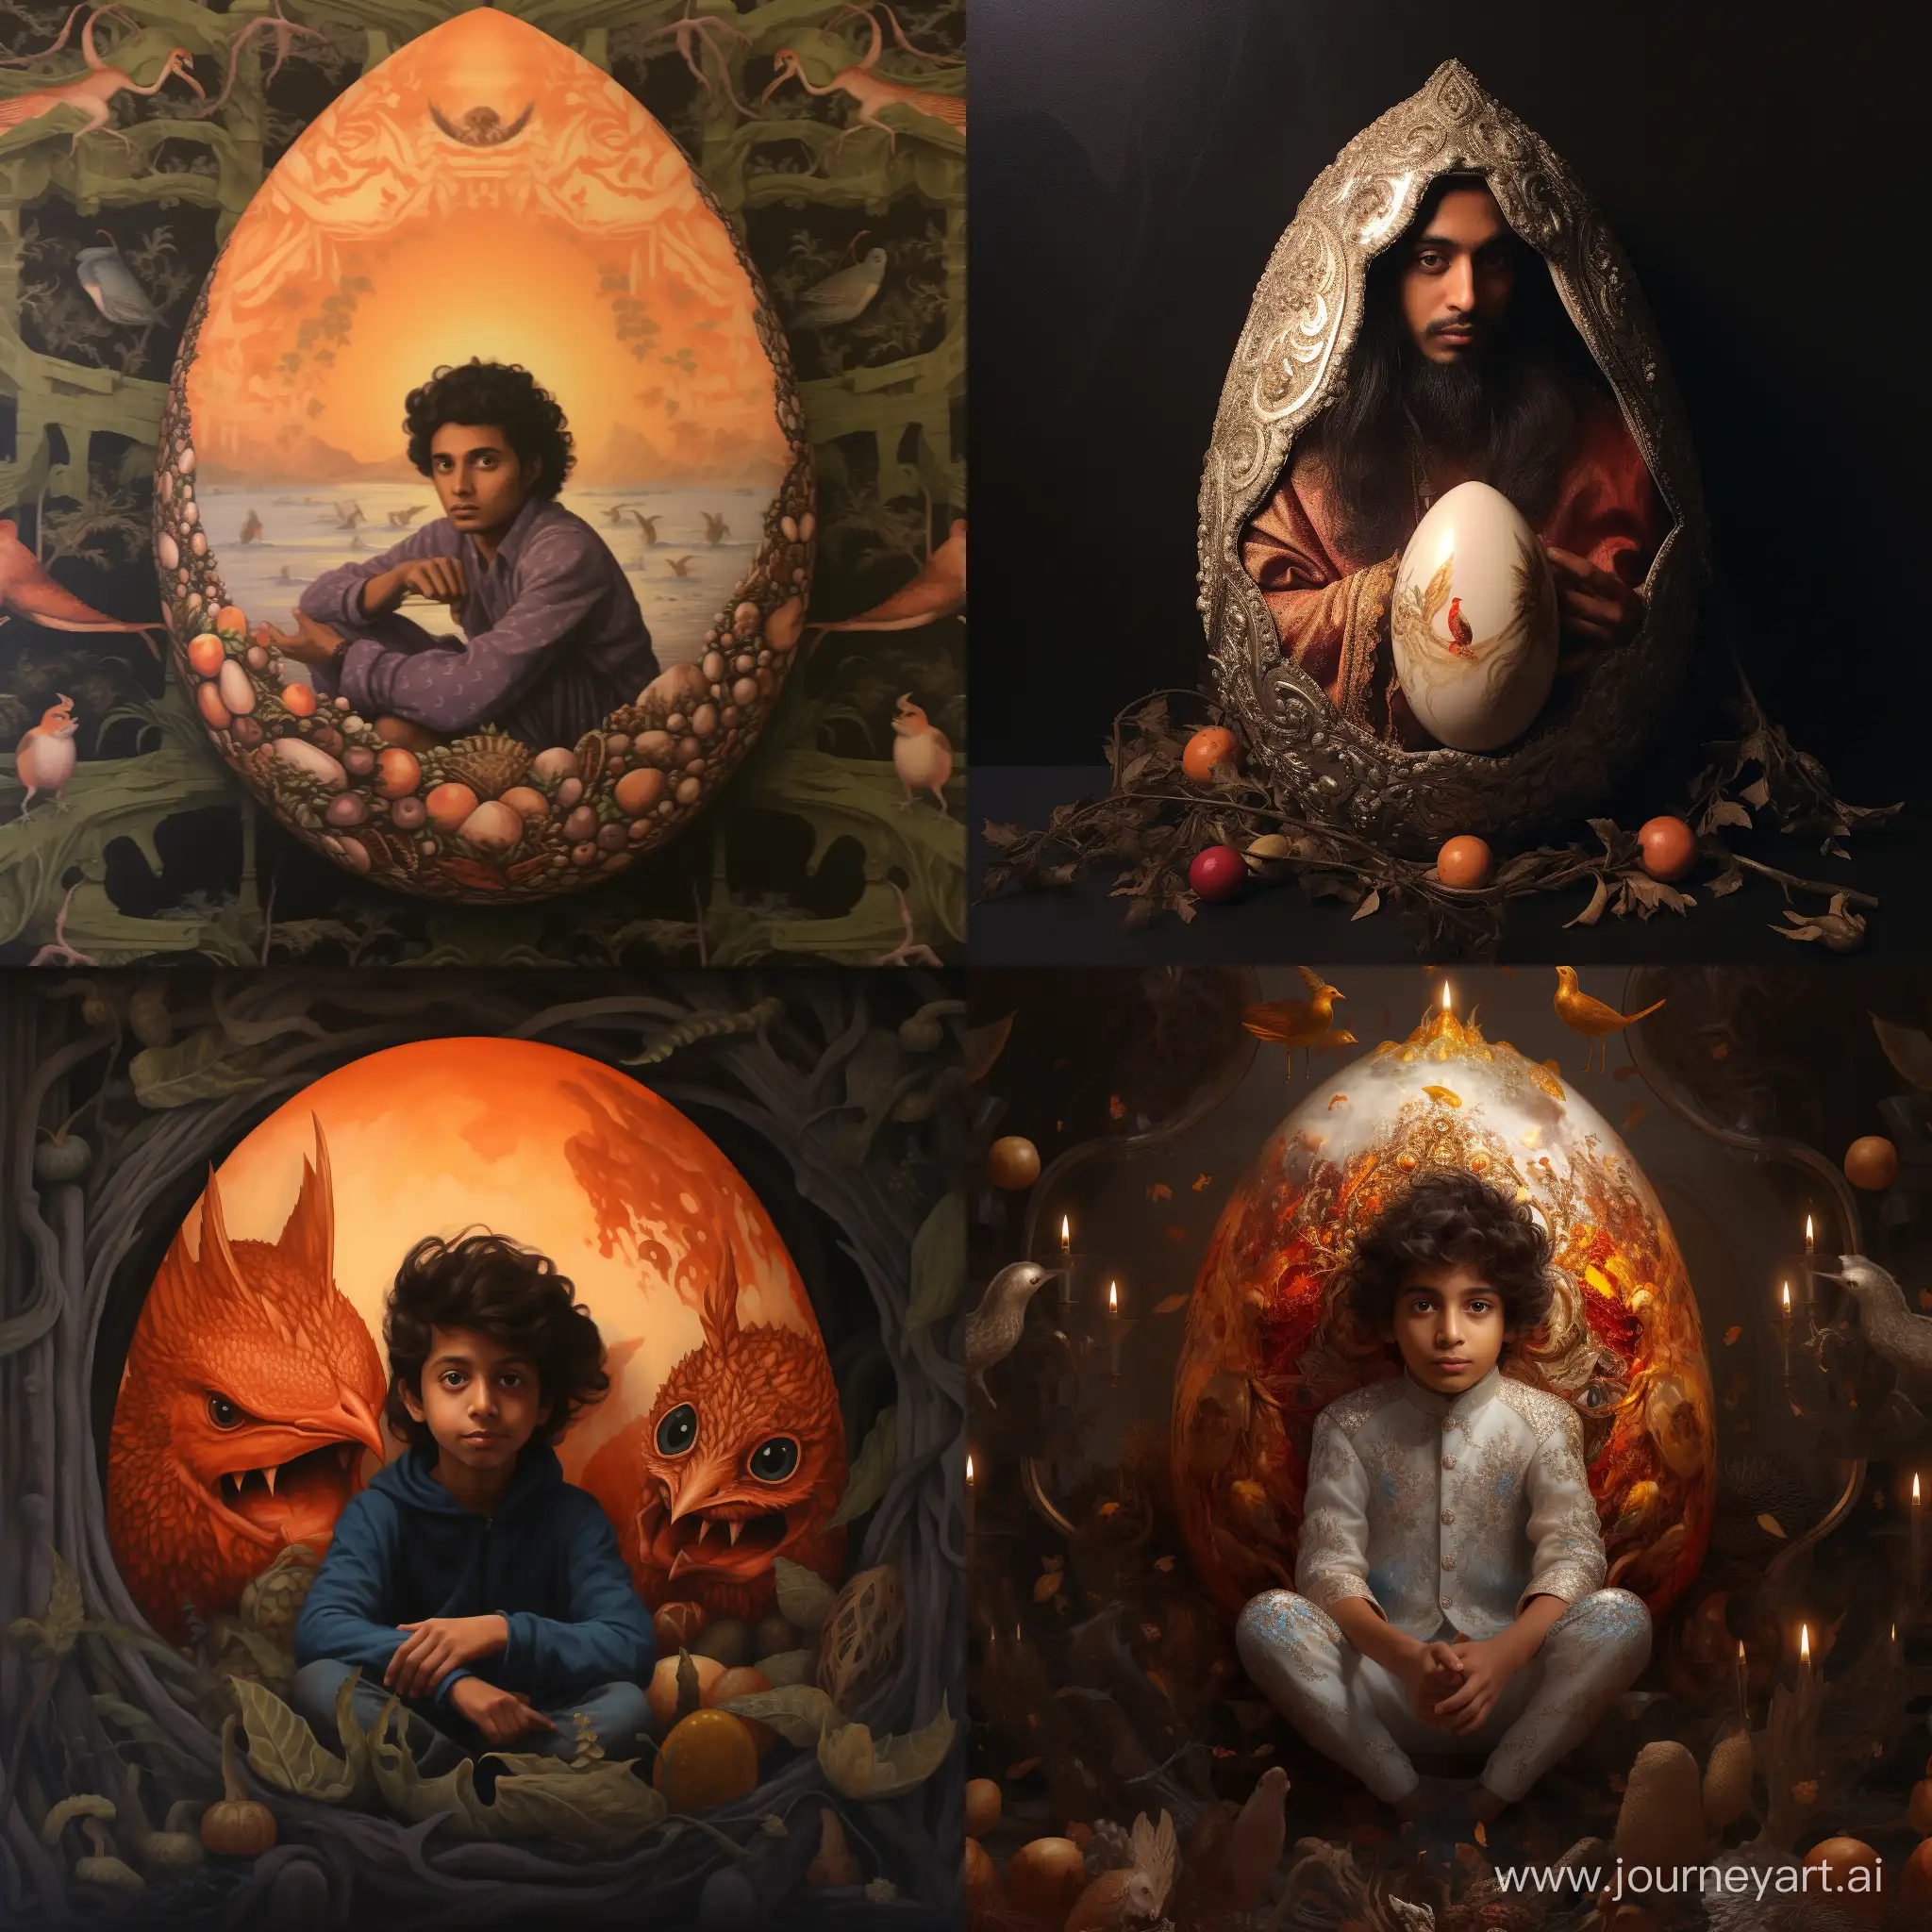 Suraj-Balancing-on-a-Golden-Egg-A-Spectacular-Display-of-Precision-and-Equilibrium